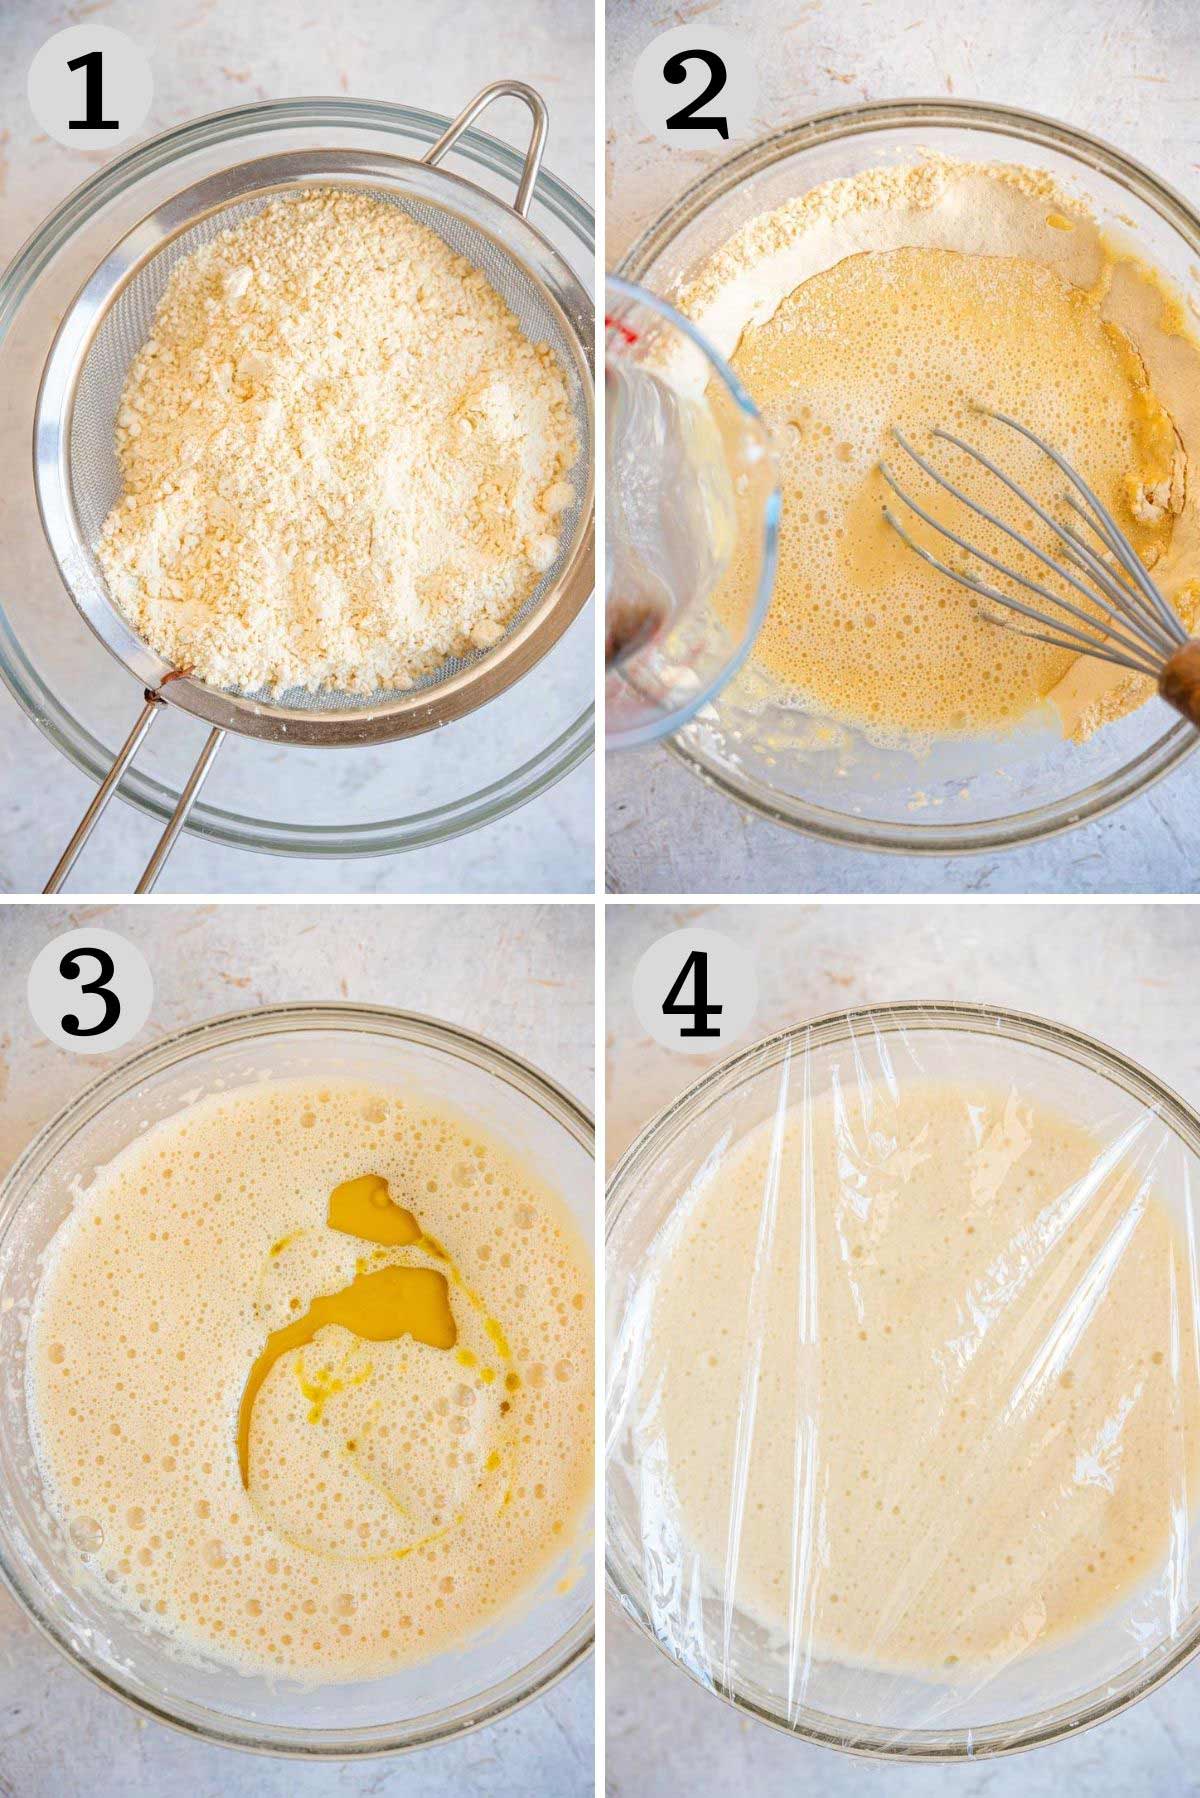 Step by step photos showing how to make La Farinata